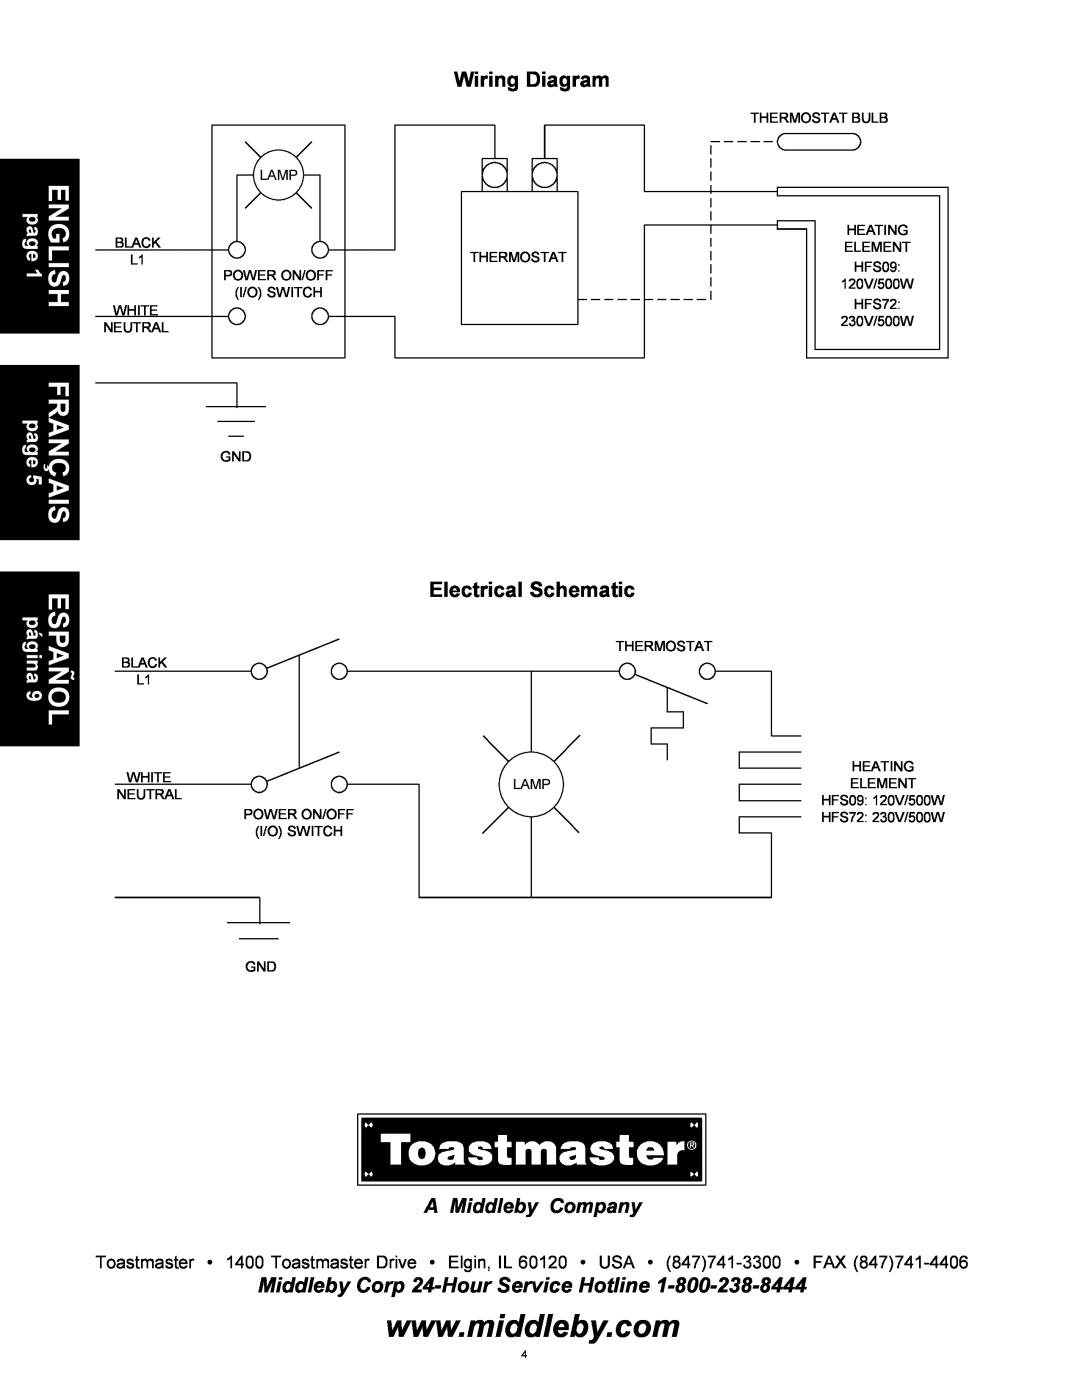 Toastmaster HFS72, HFS09 Wiring Diagram, Electrical Schematic, Middleby Corp 24-HourService Hotline, A Middleby Company 